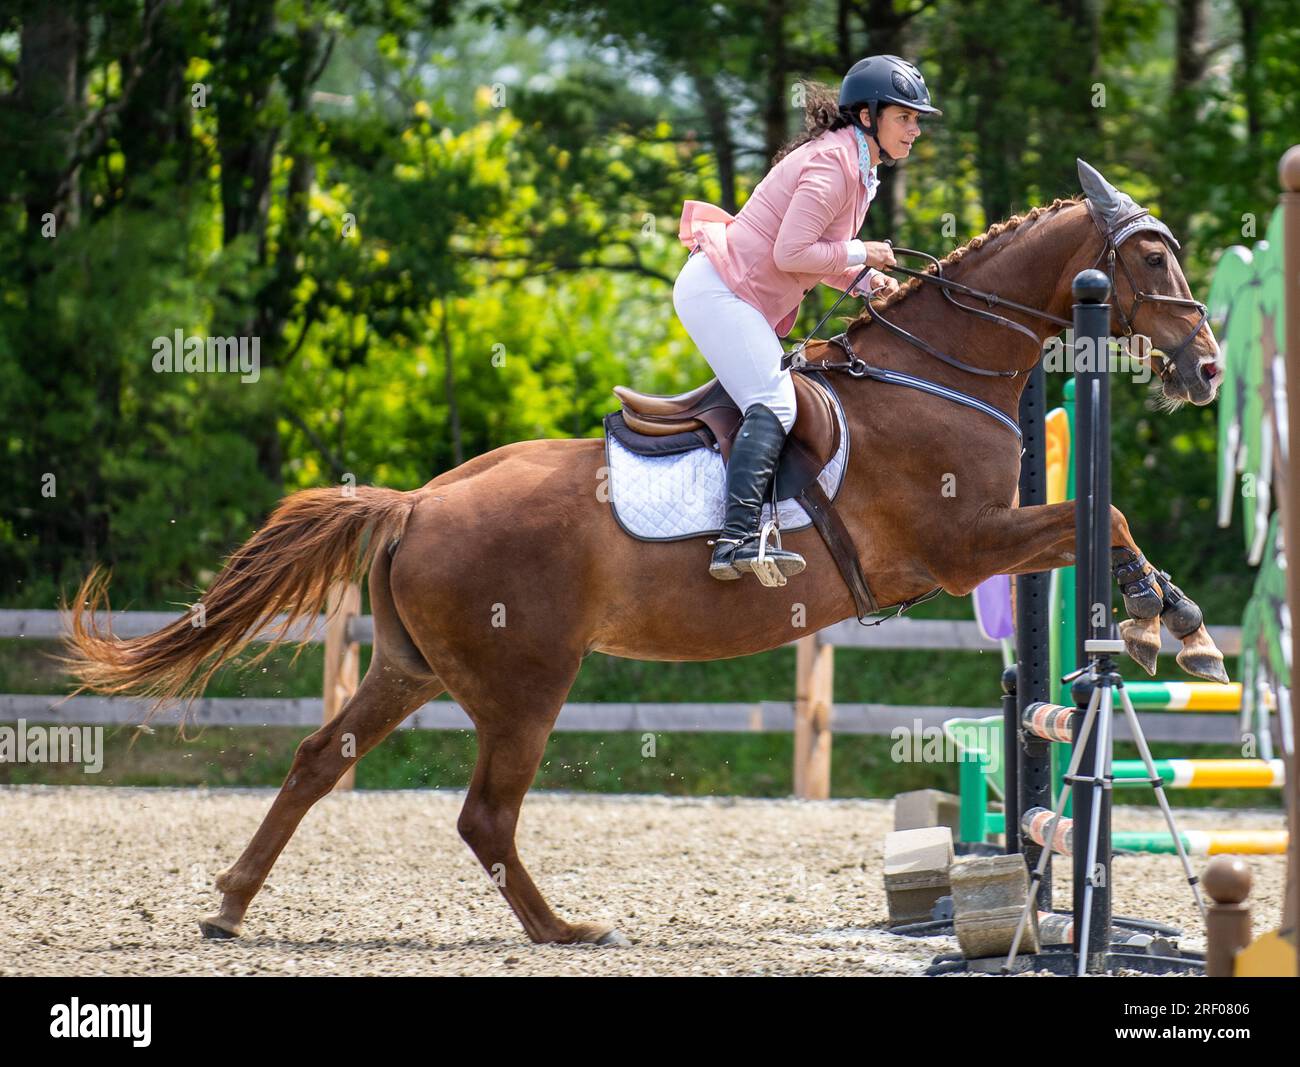 Courtney Guertin flies over a jump on her horse Jamila during a show jumping event at Sassy Strides Equestrian in Lisbon, Maine, on Sunday, July 30, 2023